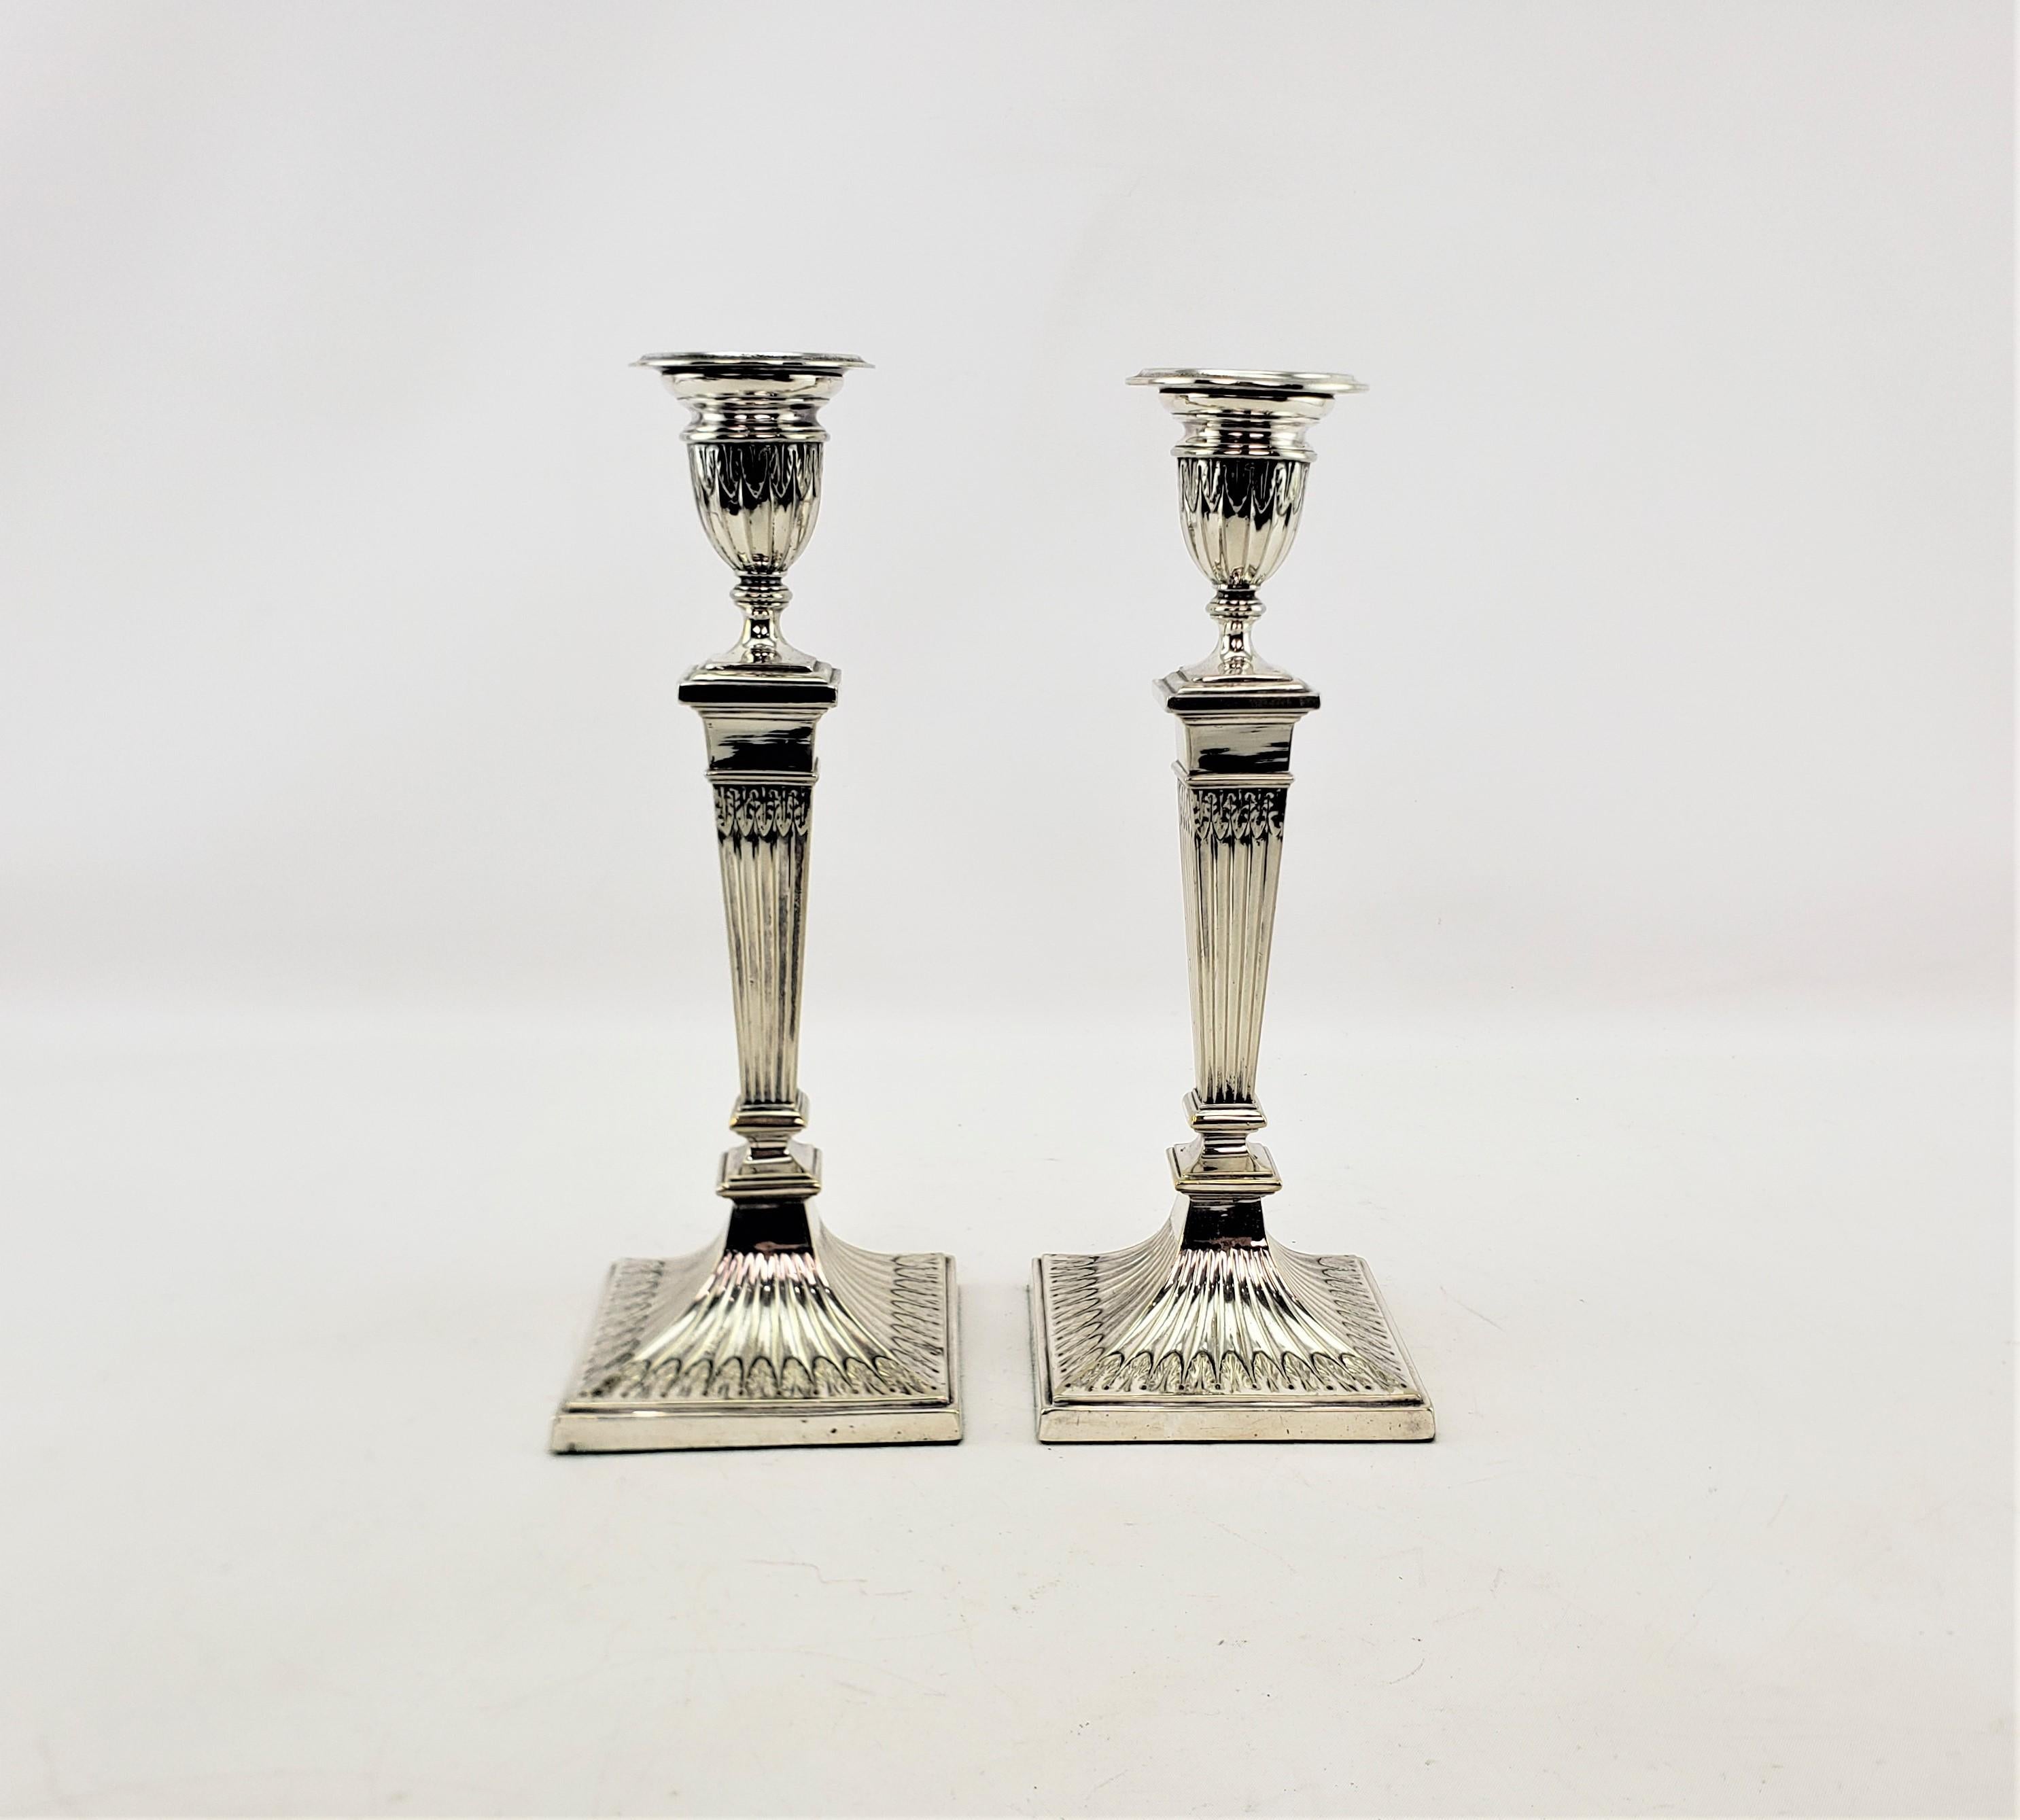 This pair of antique candlesticks were made by the well known Elkington Company of England in approximately 1920 in a period Art Deco style. The cnaldesticks are composed of silver plate and has stylized leaf decoration around the sides of the cups,